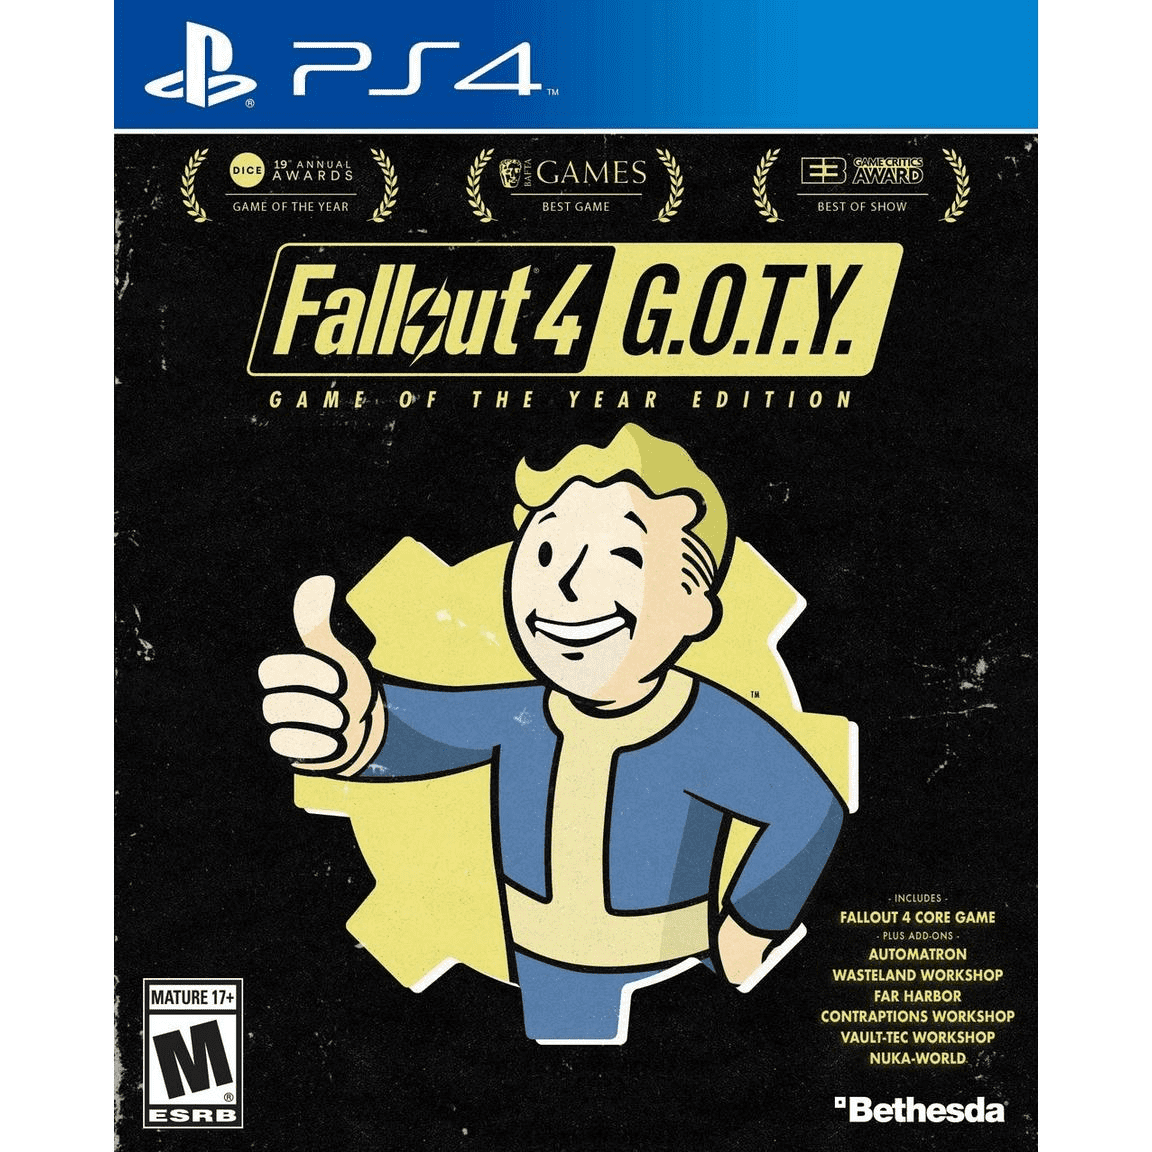 Bethesda Fallout 4 Game of the Year Steelbook (PS4)